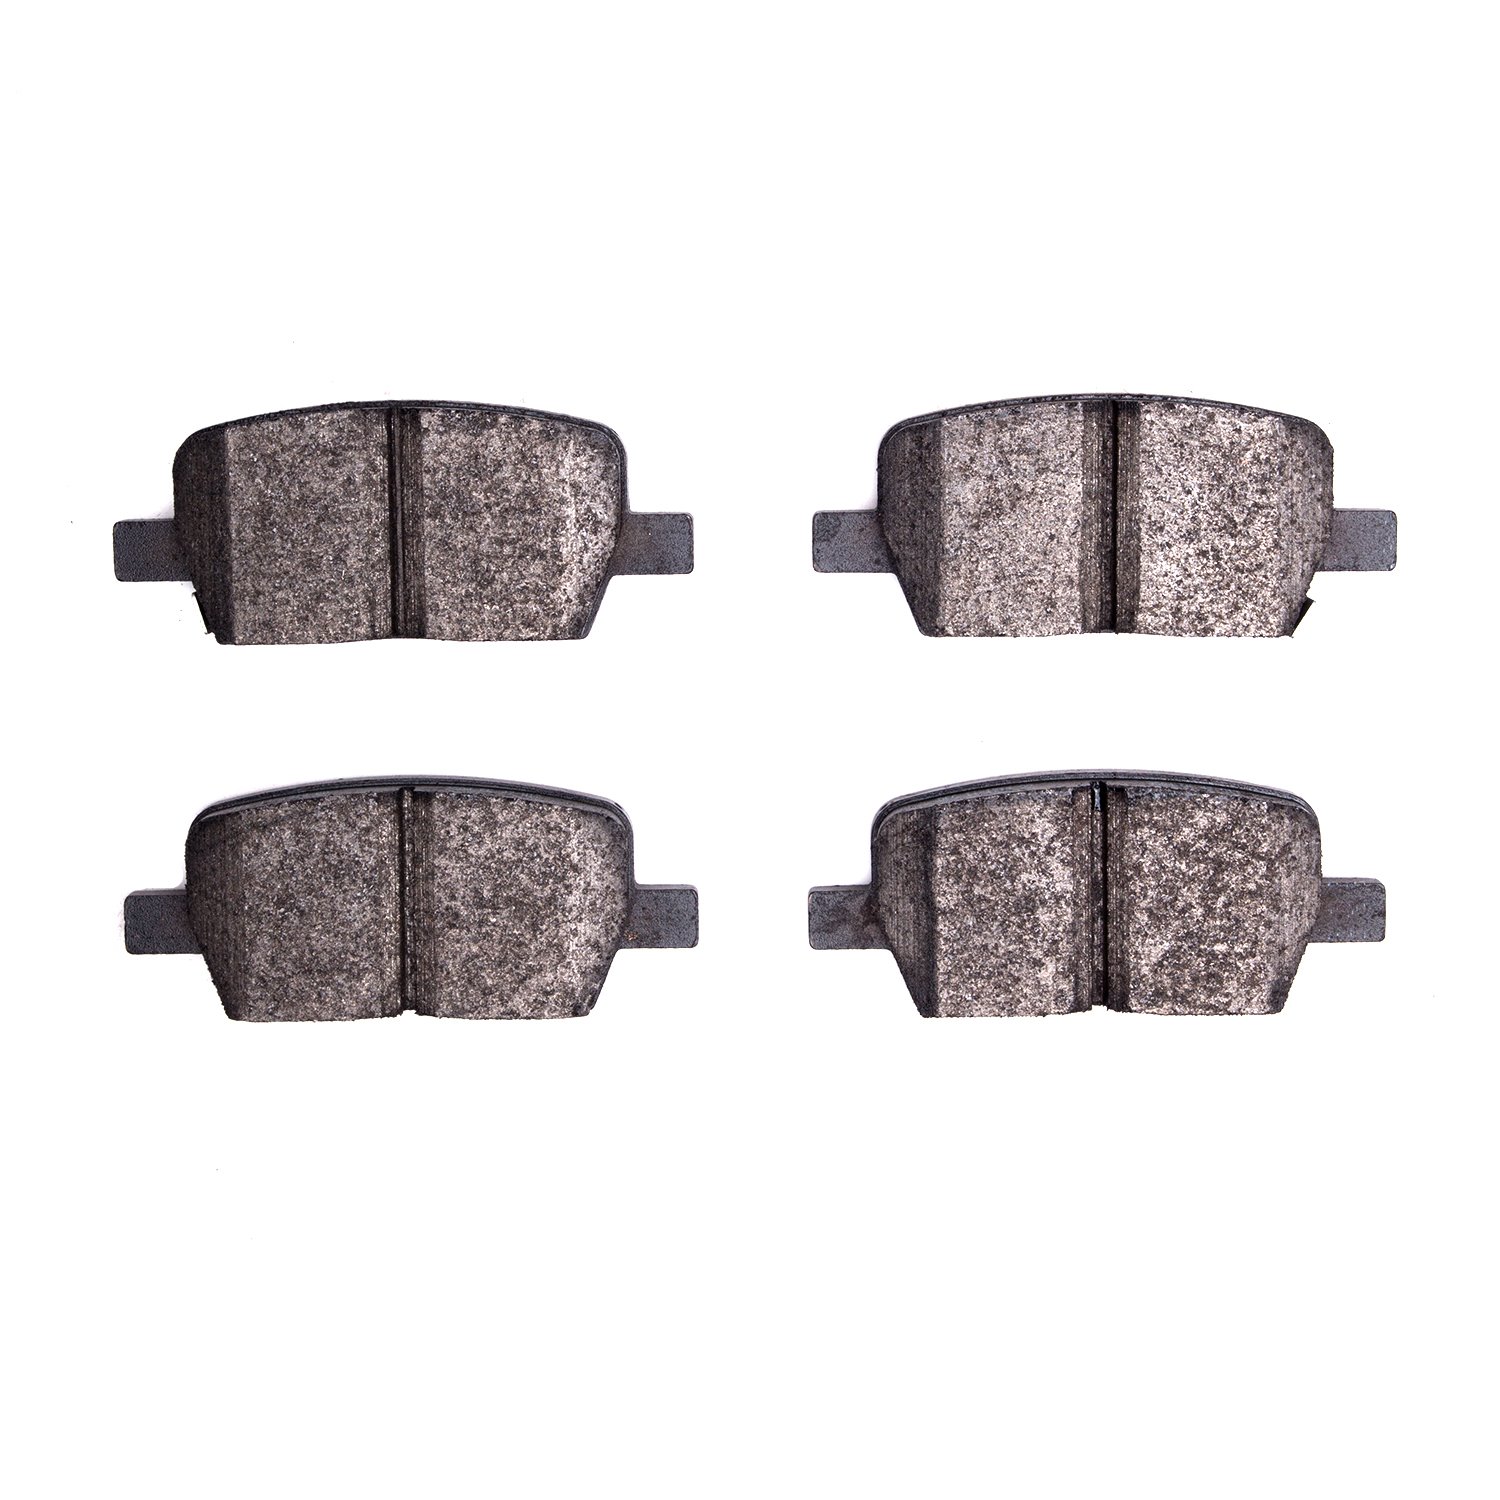 Euro Ceramic Brake Pads, Fits Select GM, Position: Rear